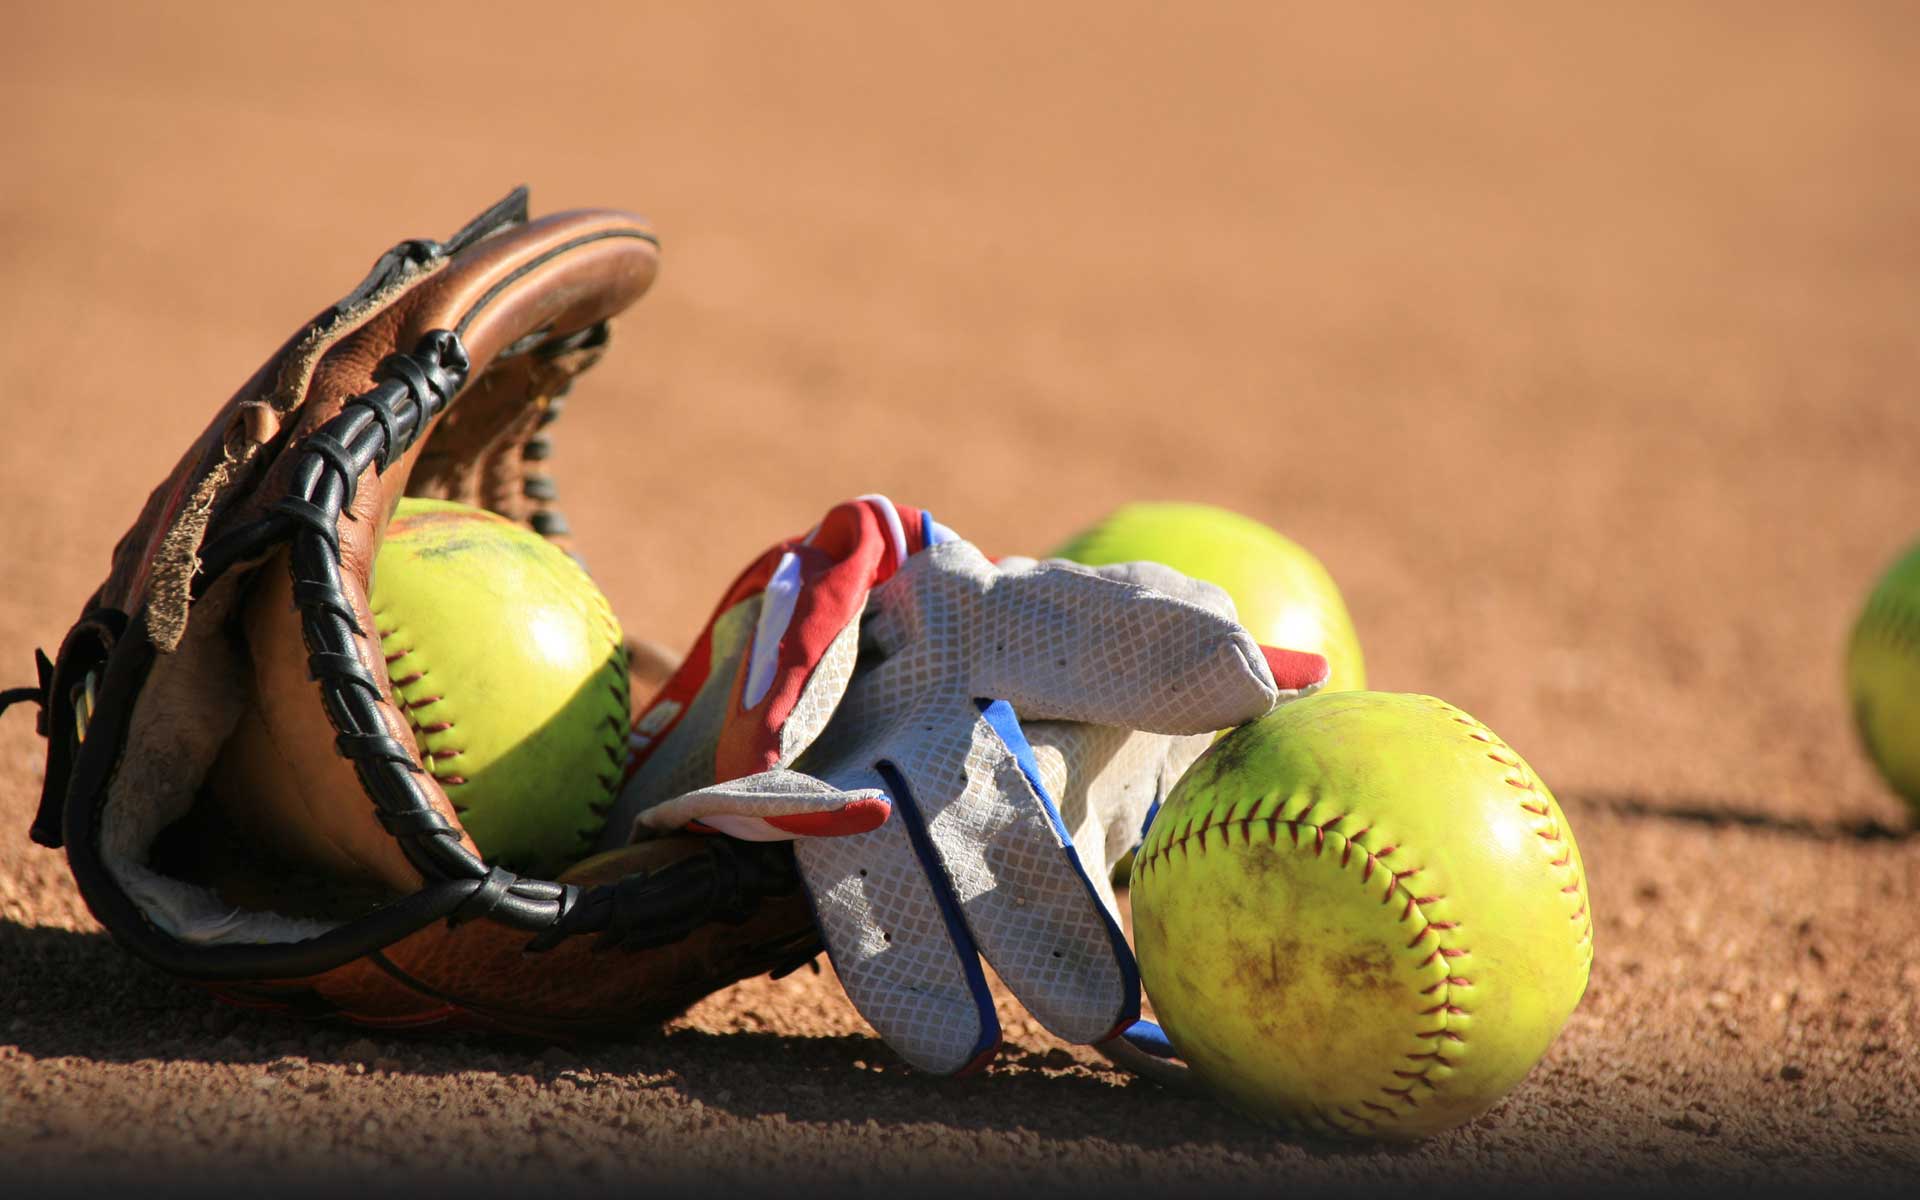 Softball Drills and Practice Plans: Infield, Outfield, and Team Drills